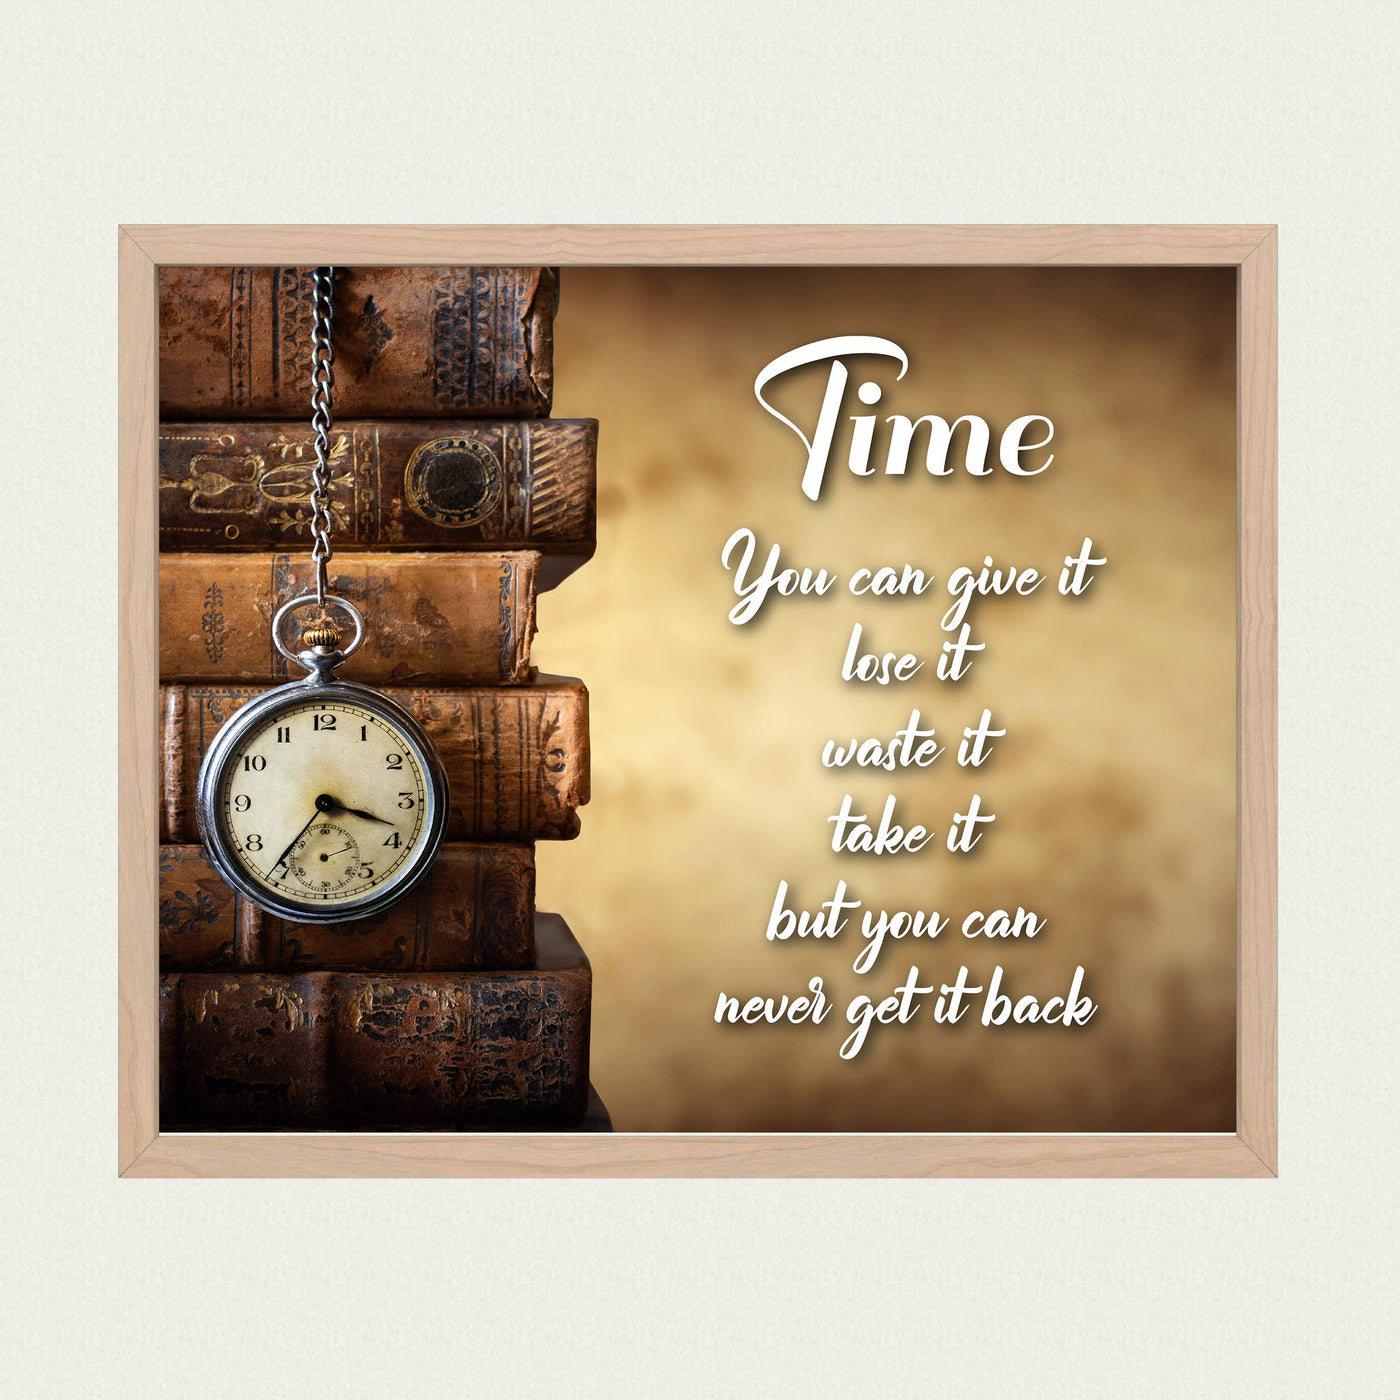 Time-You Can Never Get It Back- Inspirational Wall Art Sign - 10 x 8" Vintage Typographic Print w/Antique Book Images-Ready to Frame. Home-Office-Studio-Library Decor. Great Reminder and Gift!